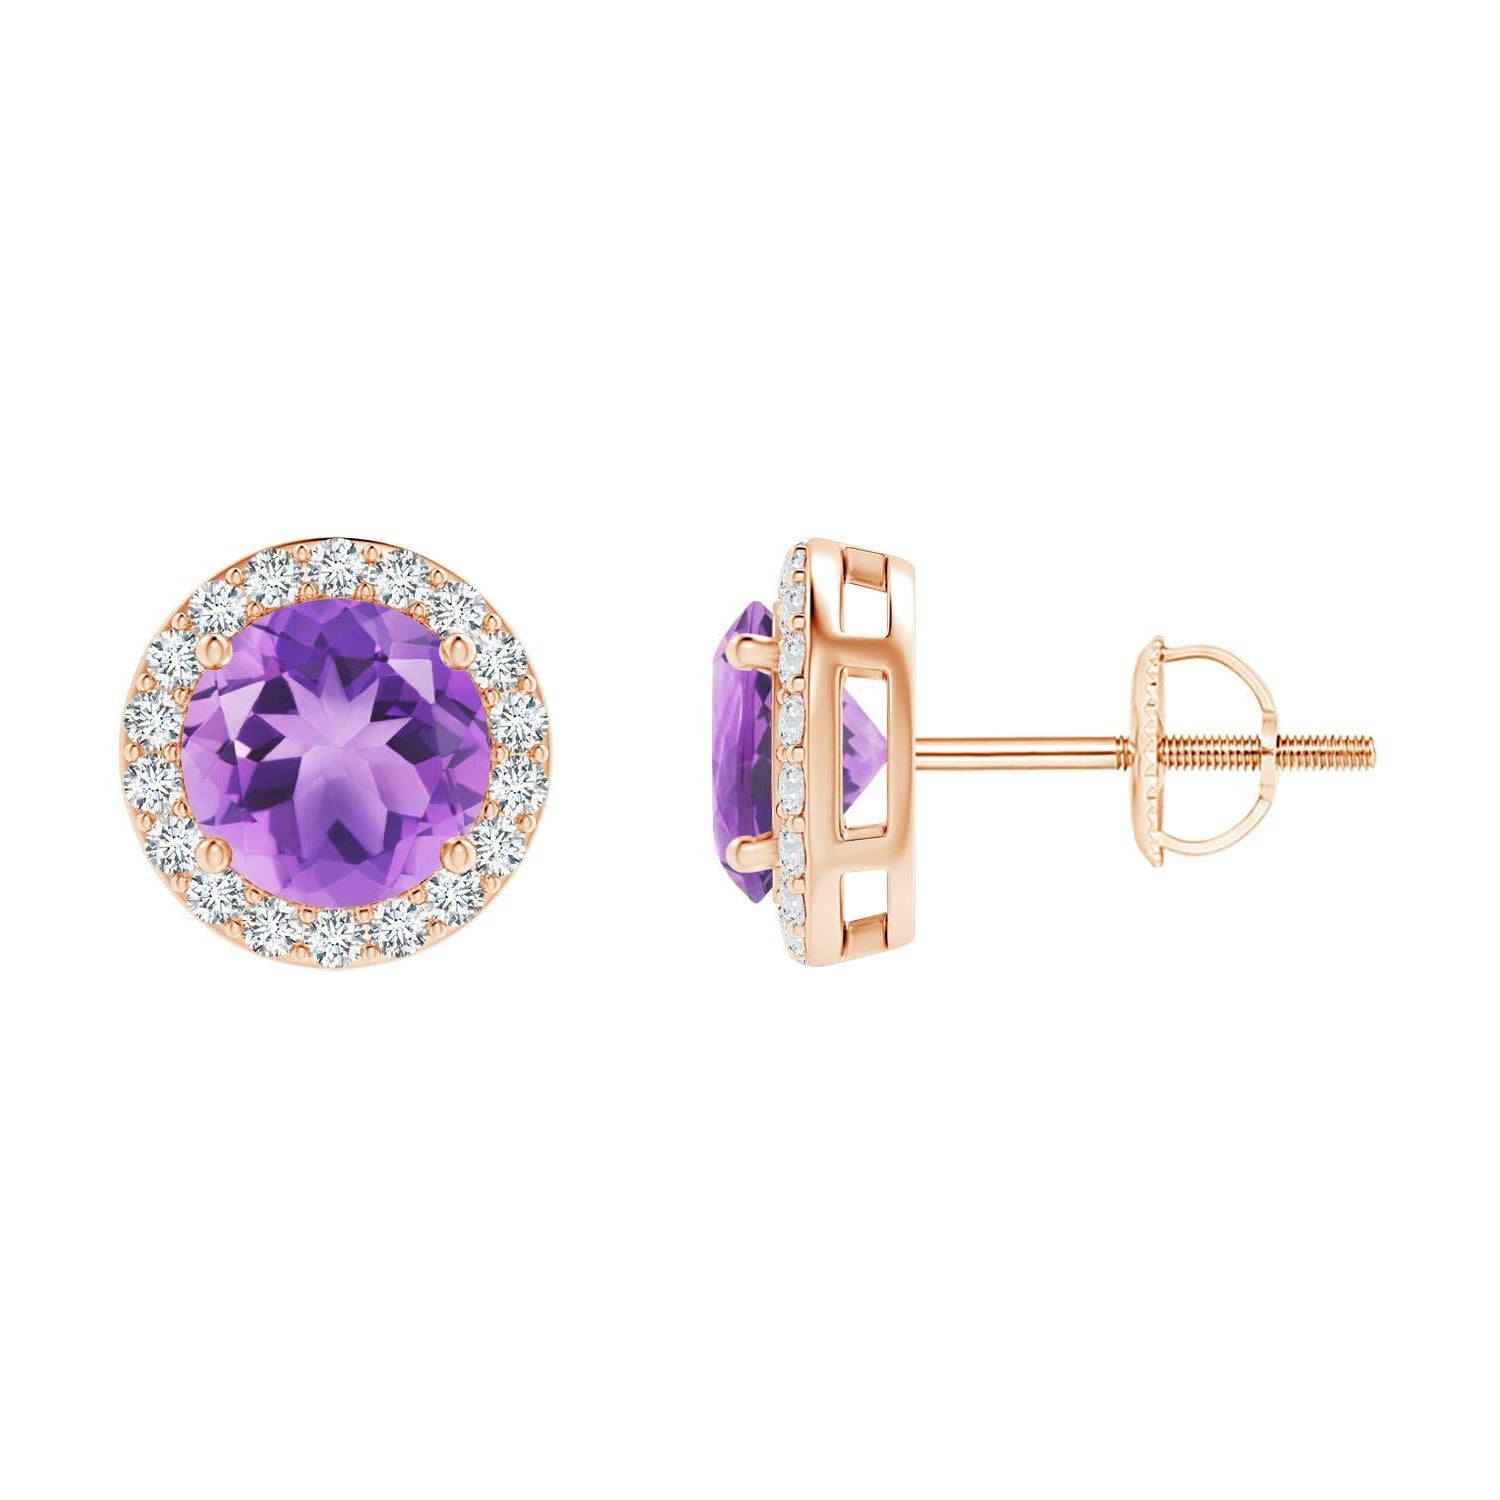 Natural Vintage Round 1.6ct Amethyst Halo Stud Earrings in 14K Rose Gold For Sale